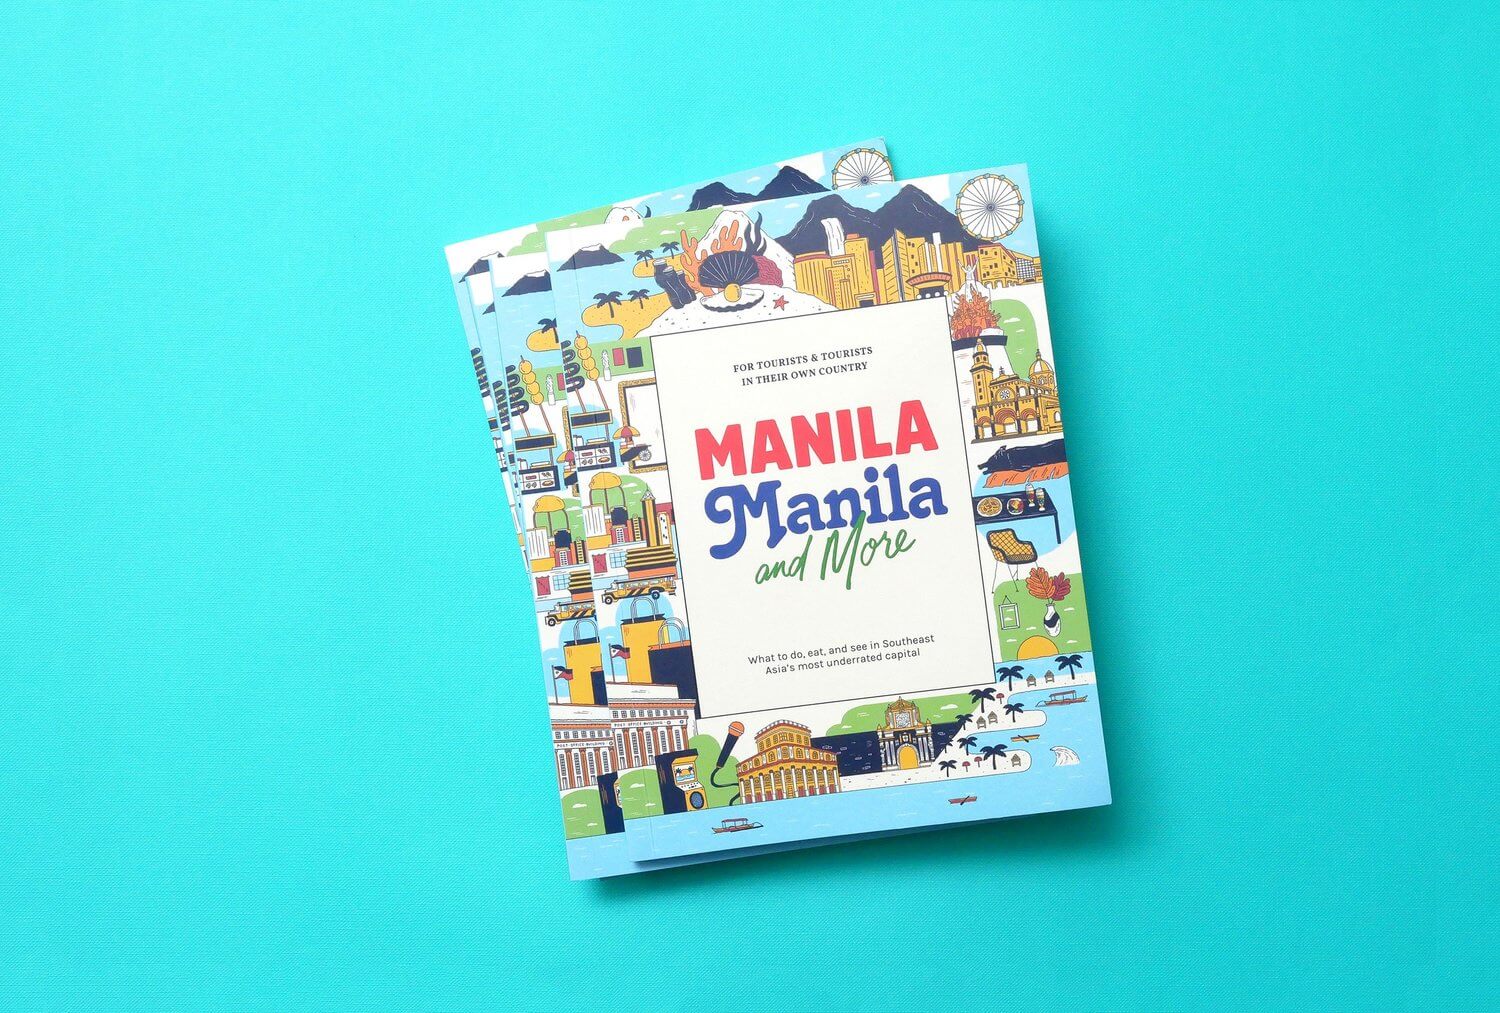 Illustrated cover design for travel guide book Manila Manila and More